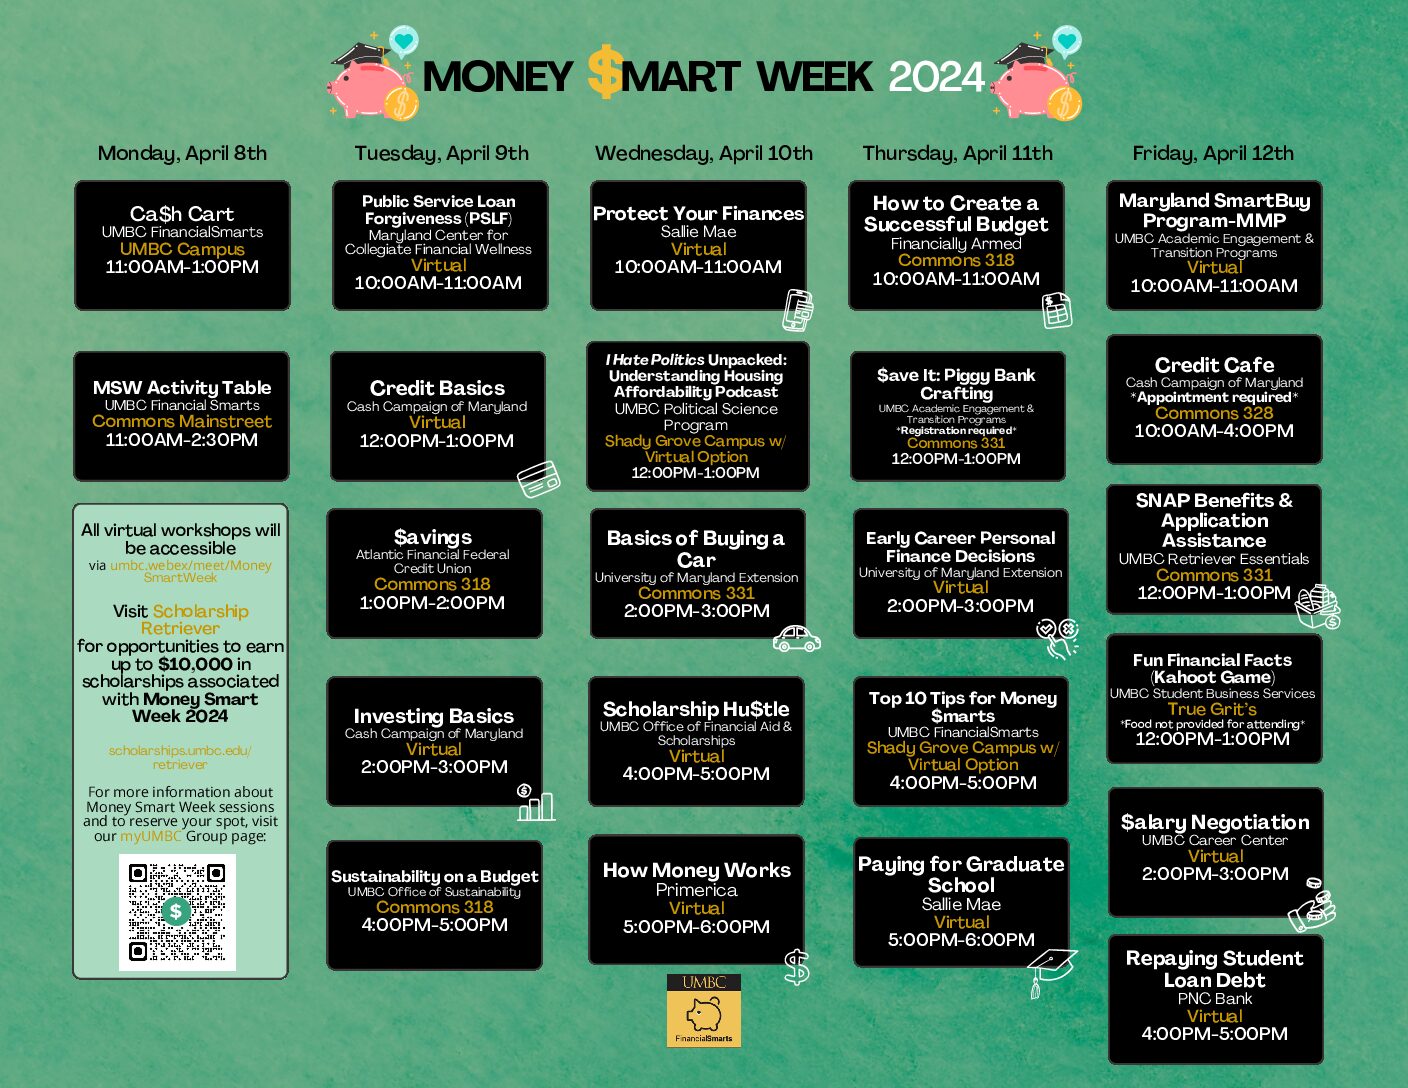 Check out Money Smart Week 2024!